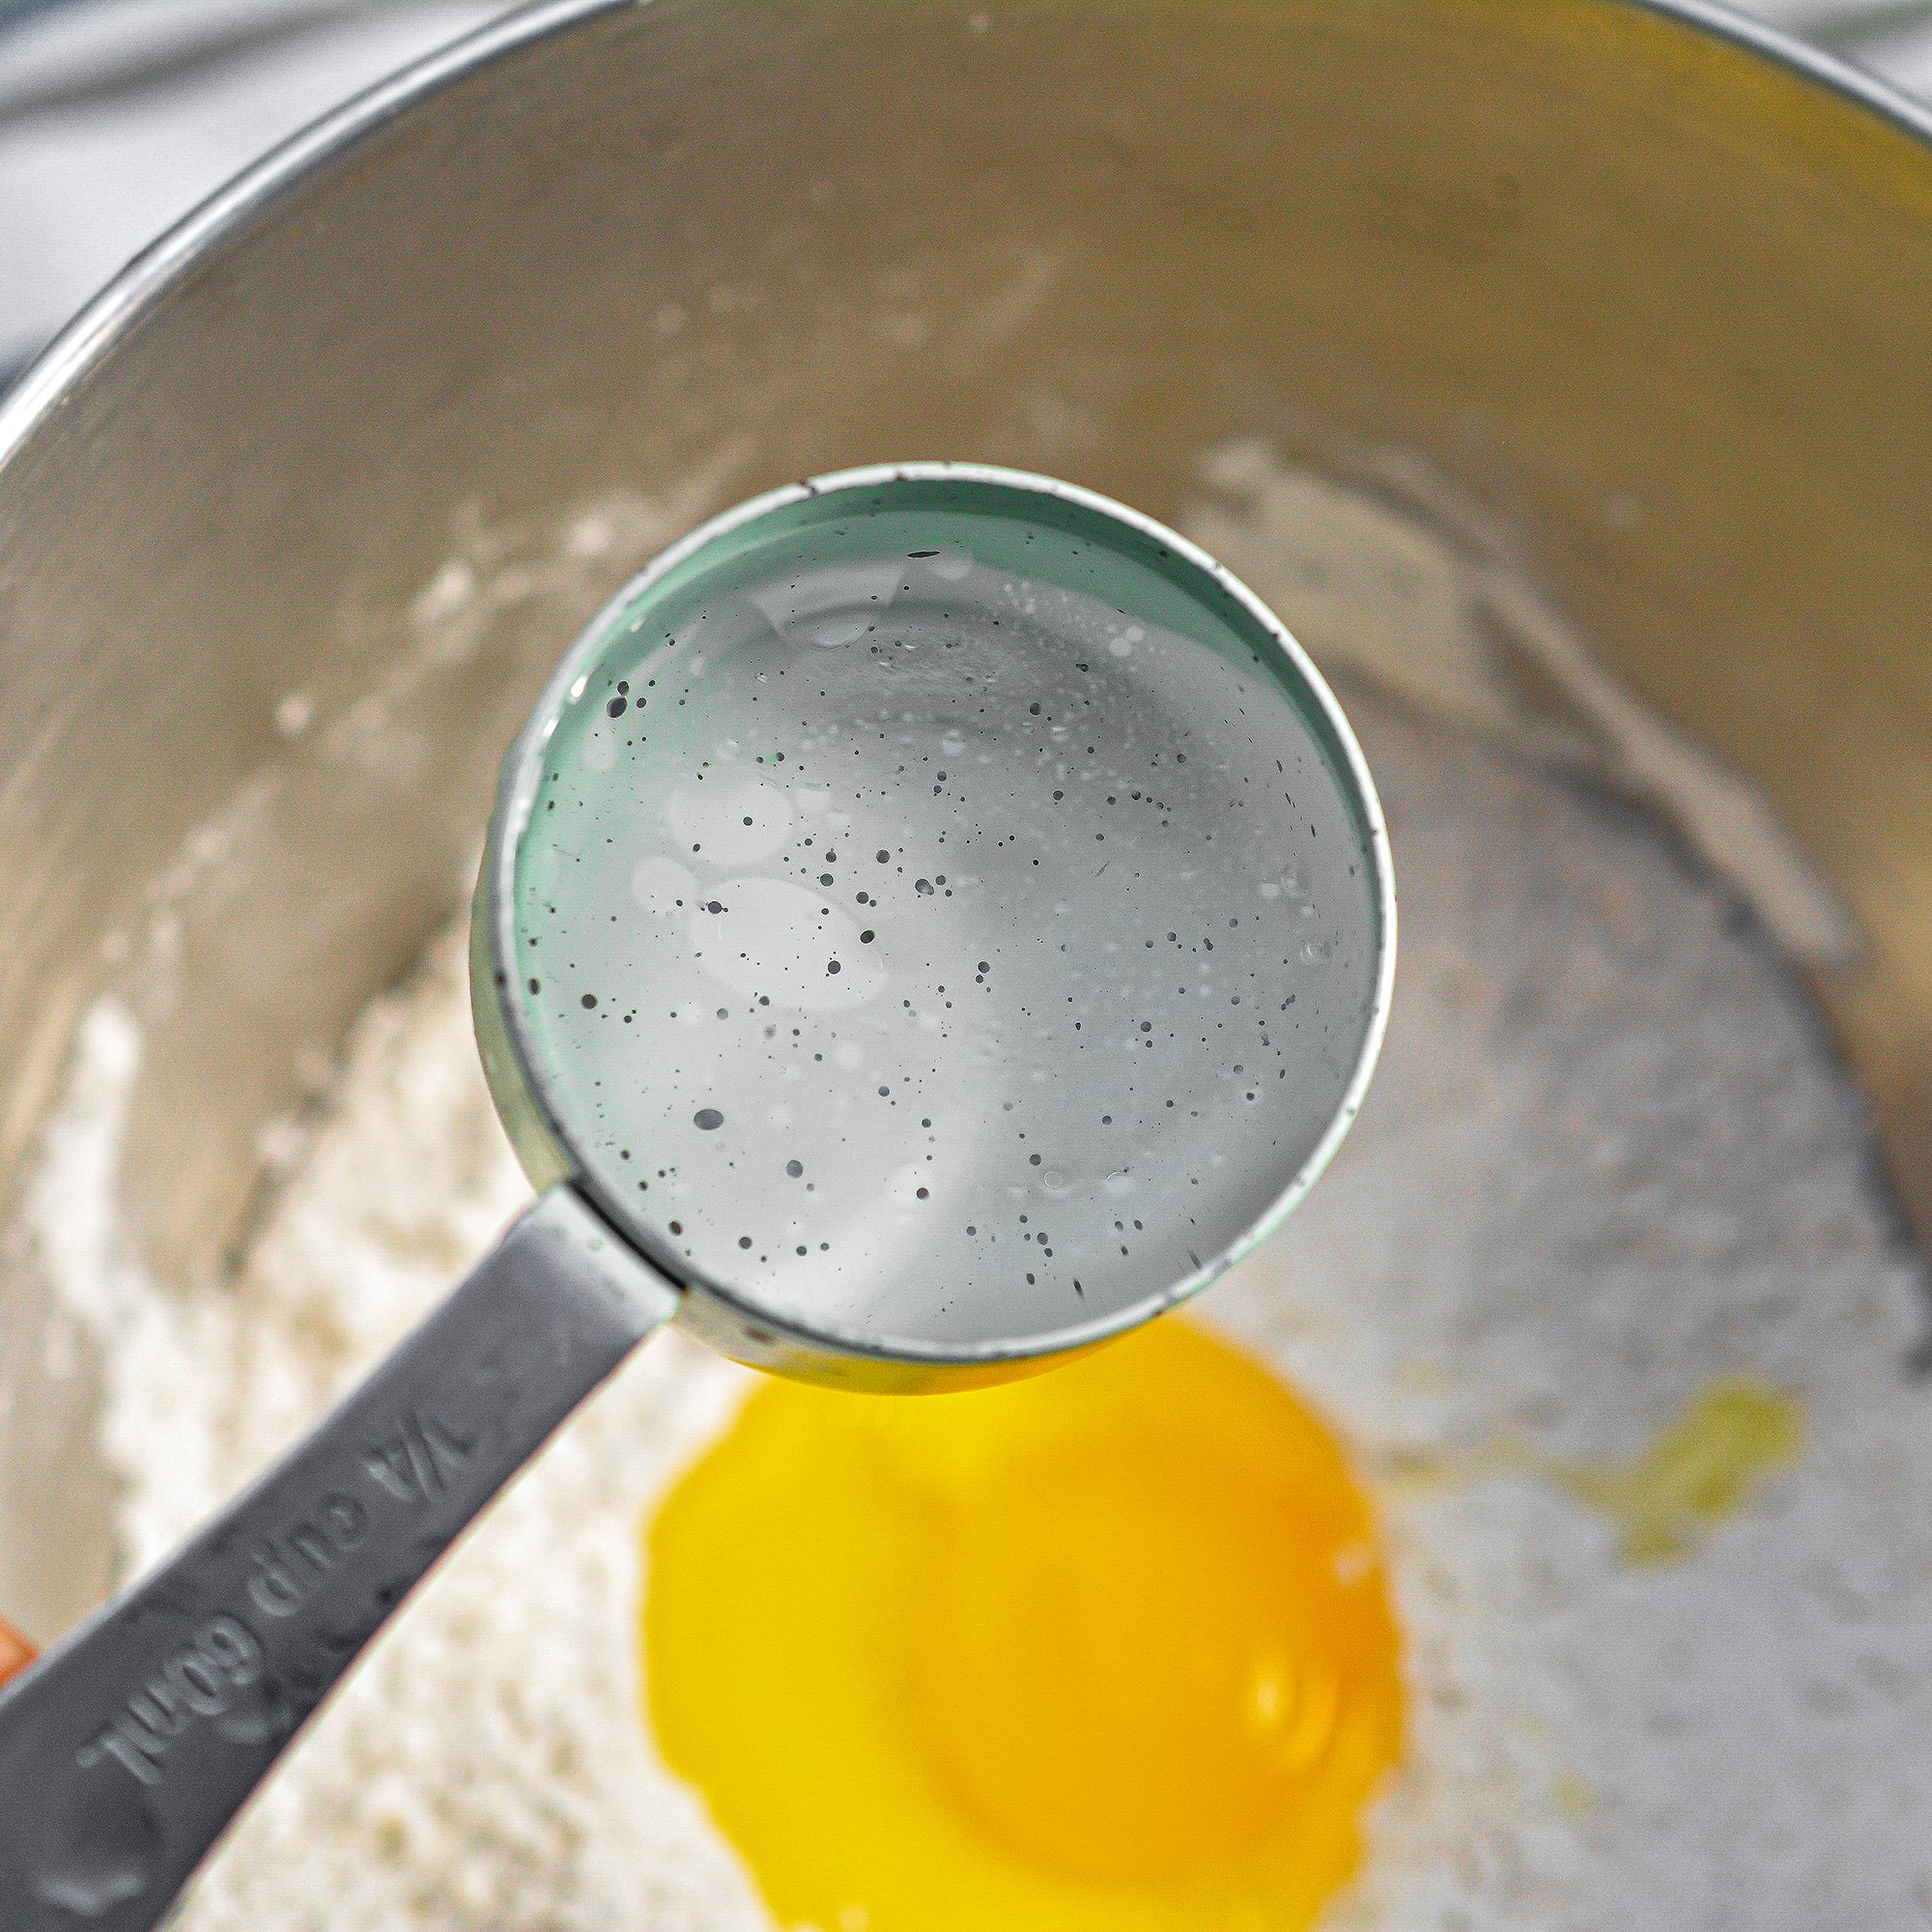 Mix the water and egg into the dry ingredients.